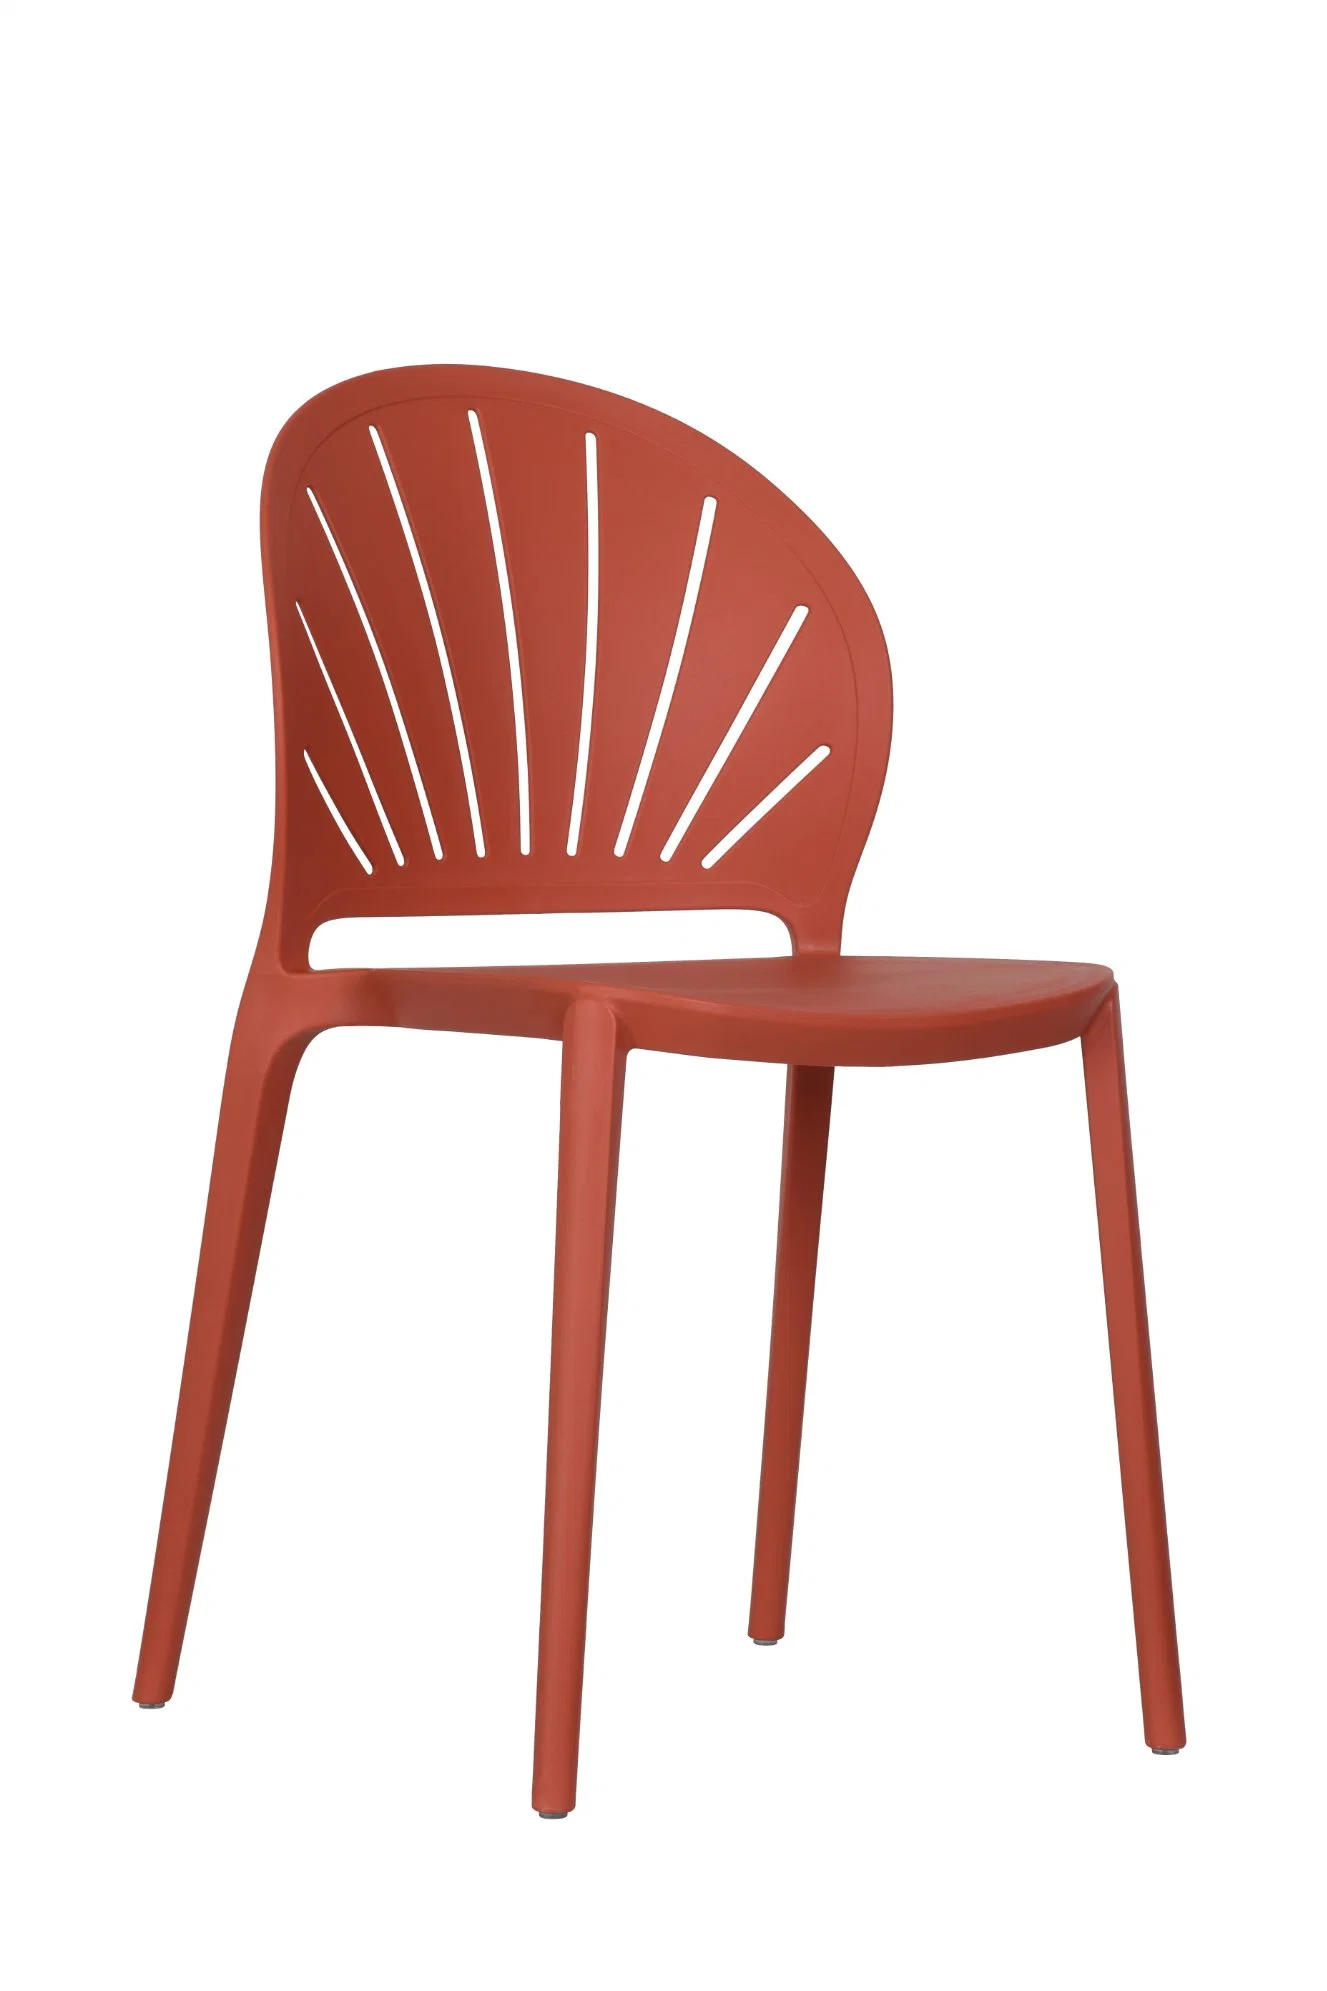 Wholesale Plastic Dining Chair Dining Room Furniture for Hotel or Restaurant High Quality Factory PP Plastic Chair